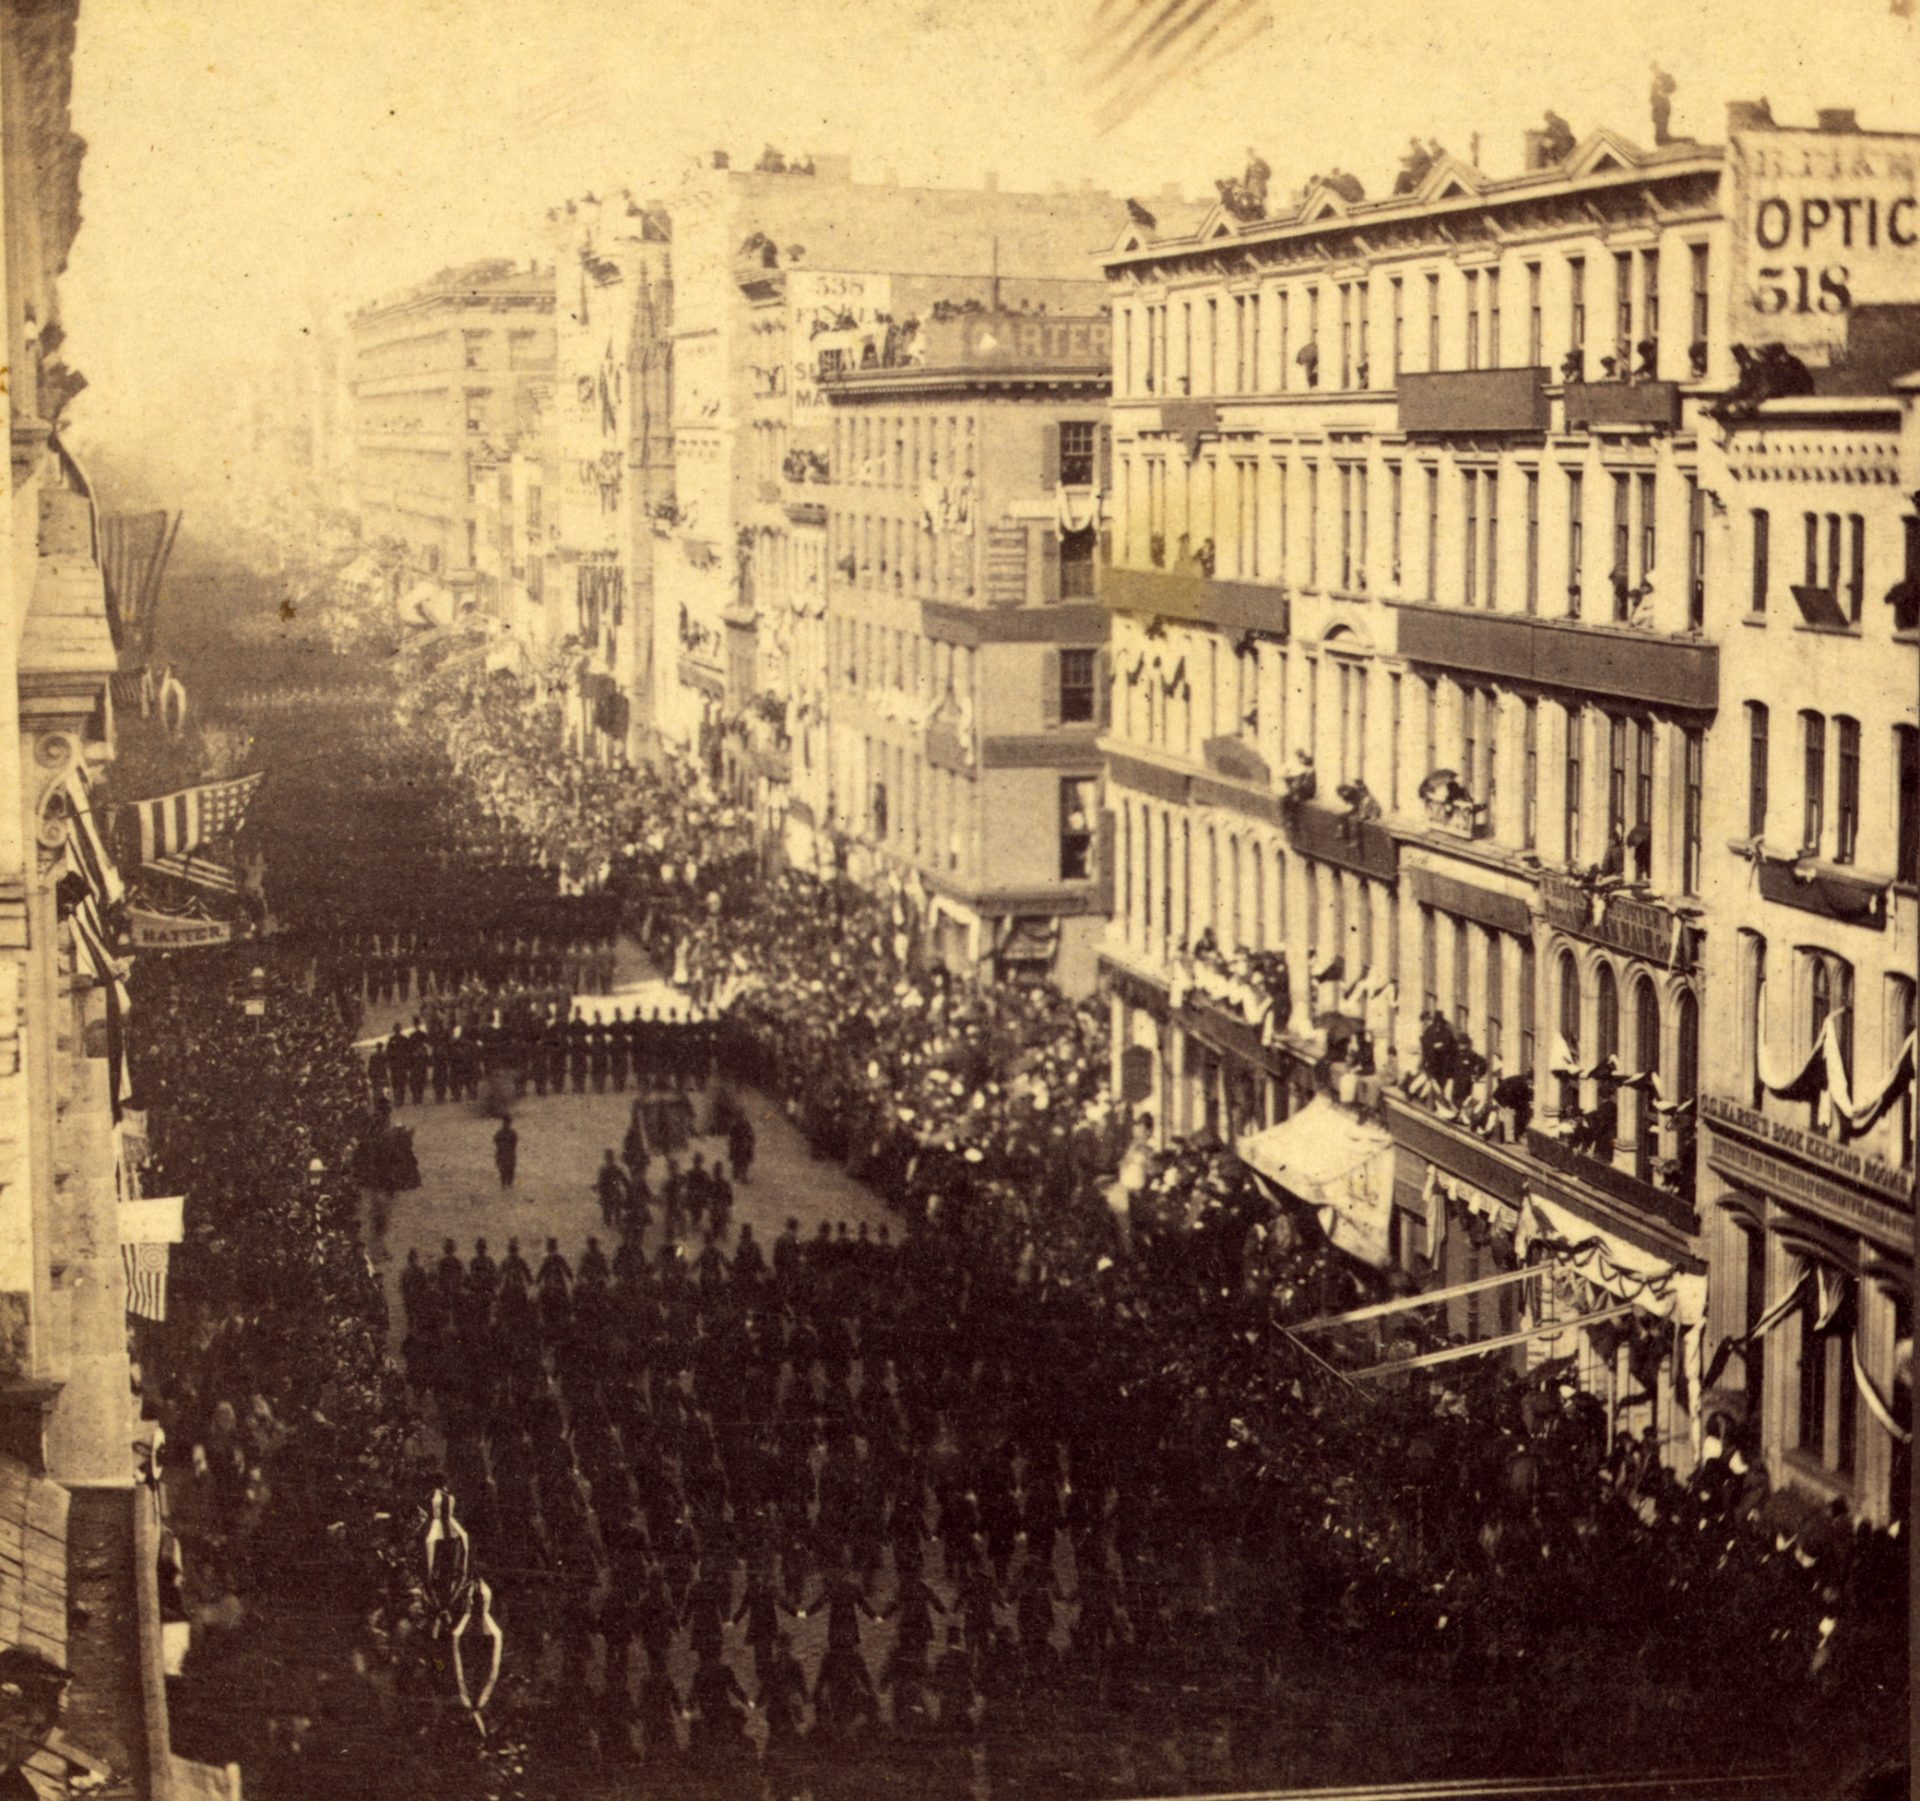 The photograph captures a moment from the funeral procession of President Abraham Lincoln in New York on April 25th, 1865. Crowds of onlookers fill the balconies and windows of the buildings lining the street, while masses of people gather on the sidewalks to witness the event. A large military escort marches in formation ahead of the hearse, which is not visible in the frame, illustrating the grand scale of the public mourning for the assassinated president. The buildings are draped with mourning bunting and American flags, and the solemn mood is palpable even in the still image.